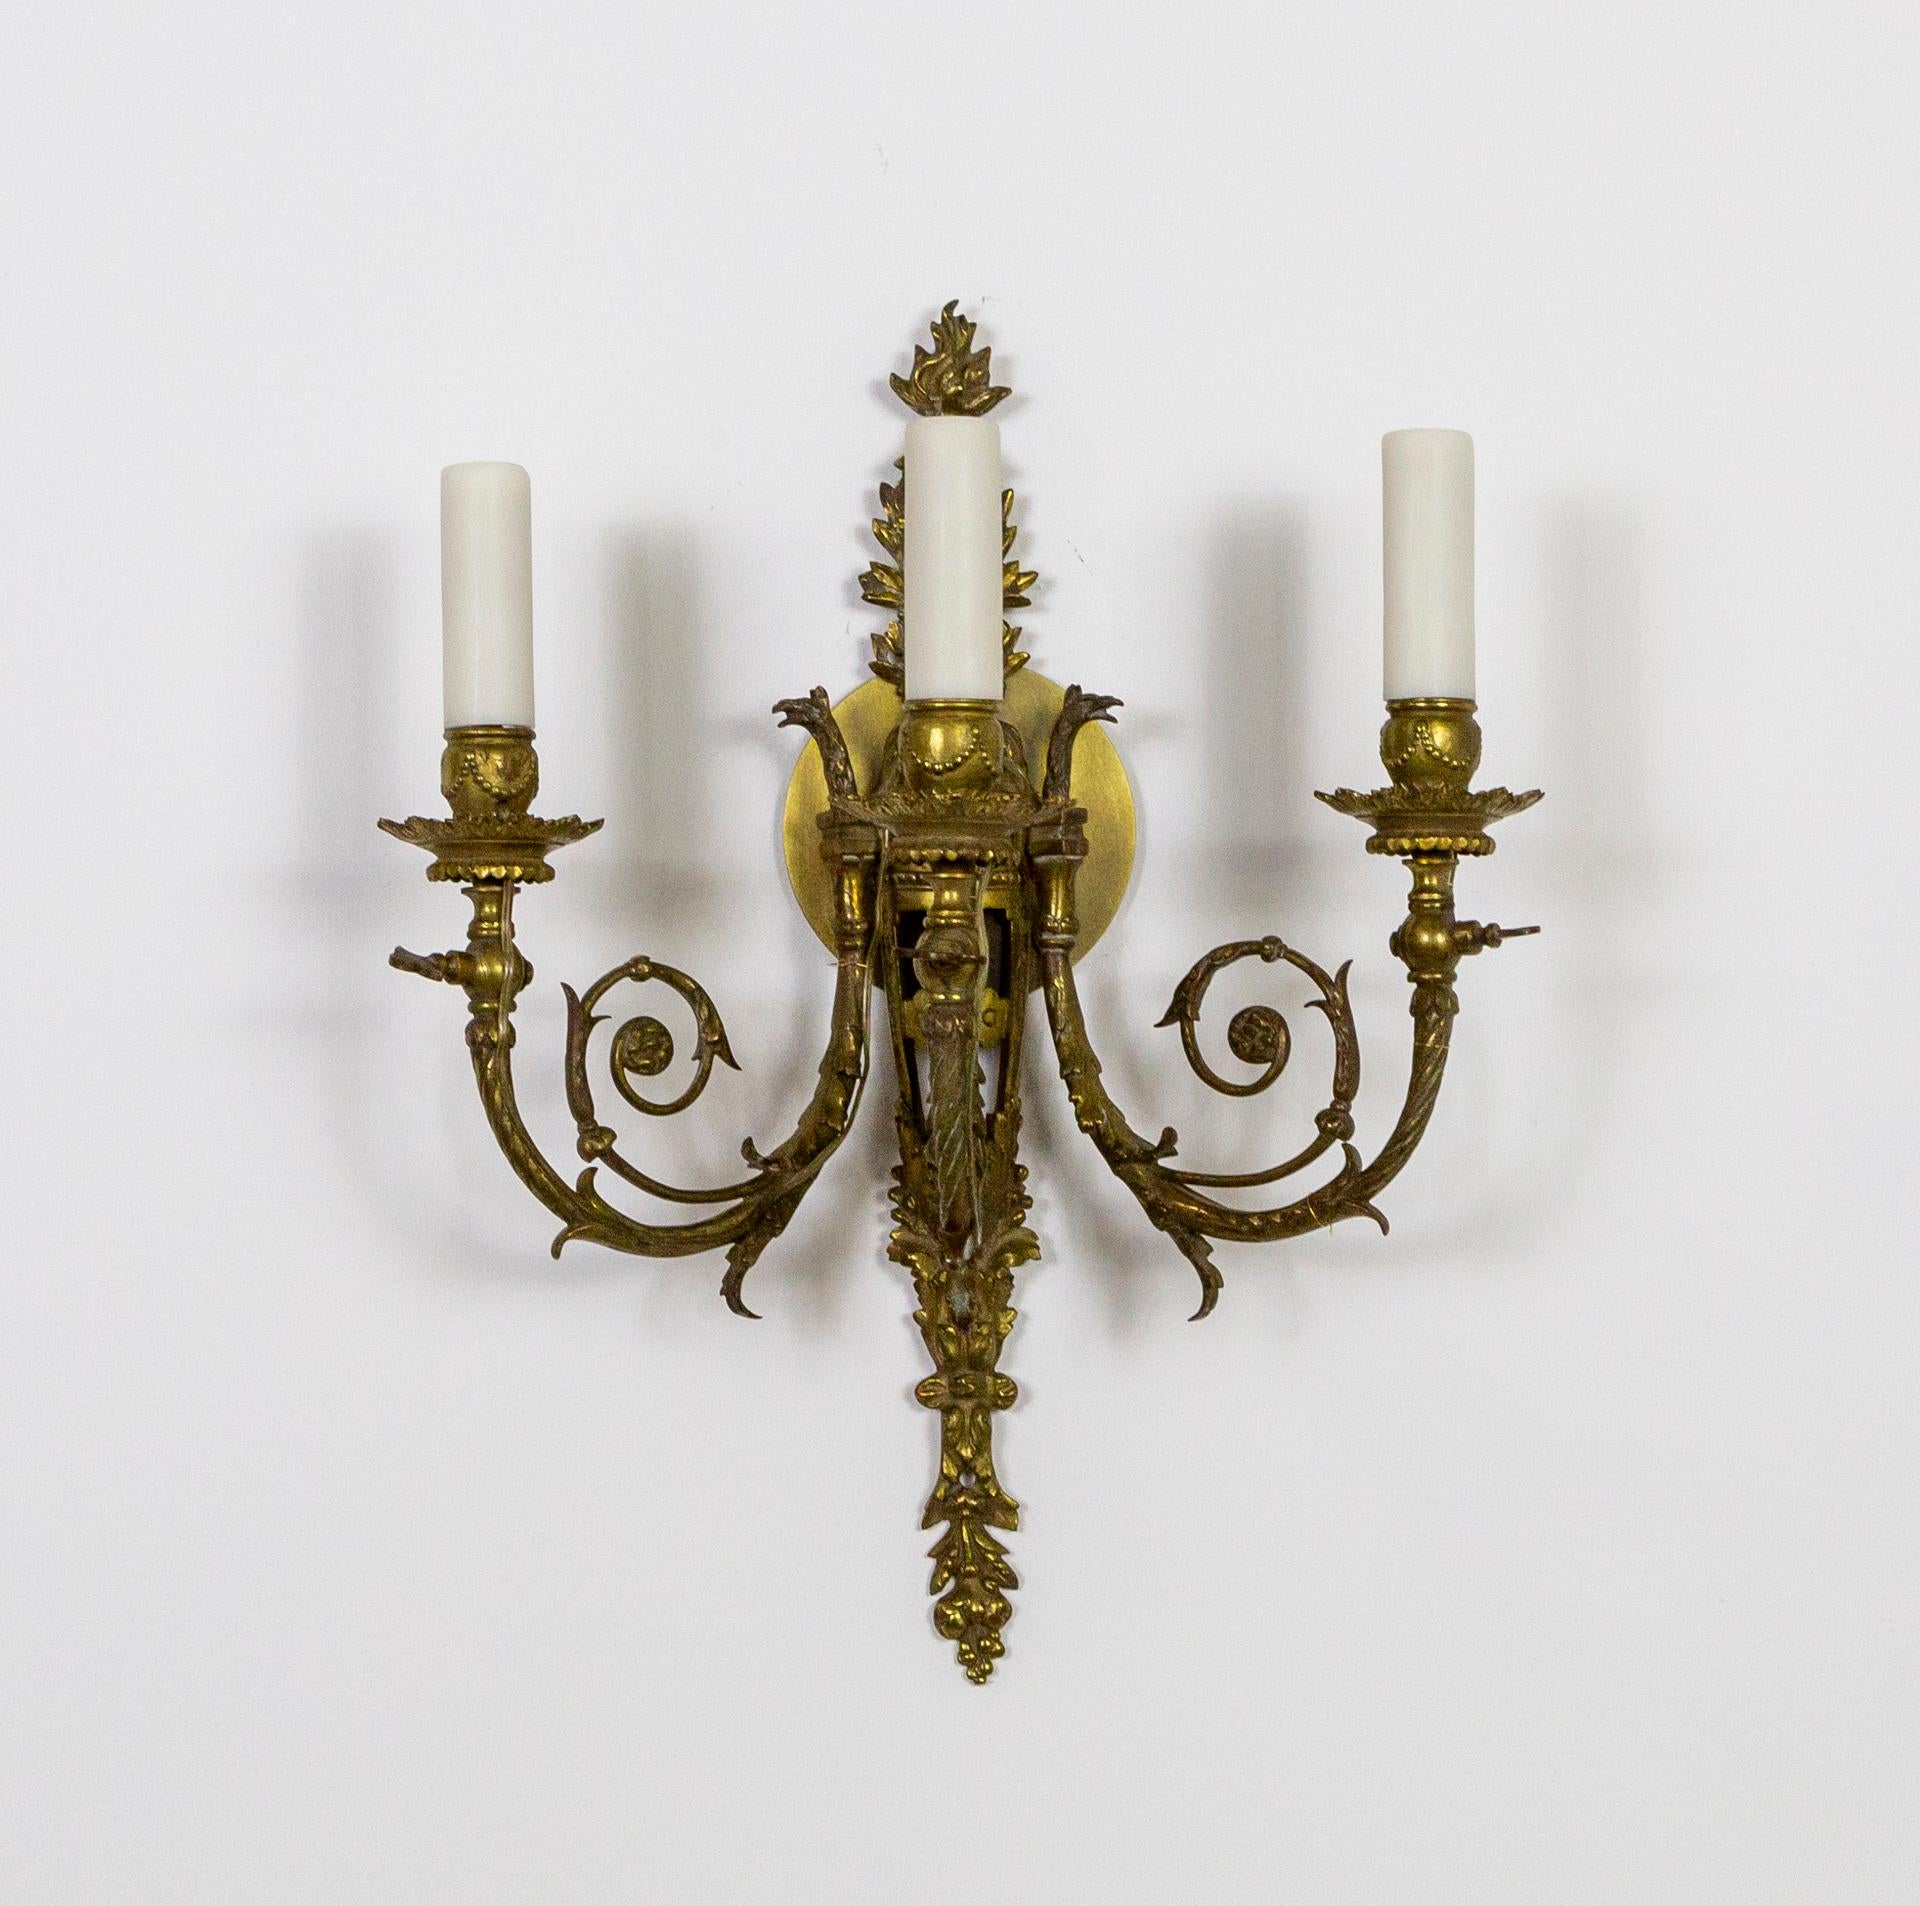 A pair of ornate, French, highly detailed, Baroque style wall sconces cast in heavy, solid brass. With delicate, fern-like curls, leaves and berries, acanthus leaves, and flame top. Three Griffin heads lead into the three swooping arms from the